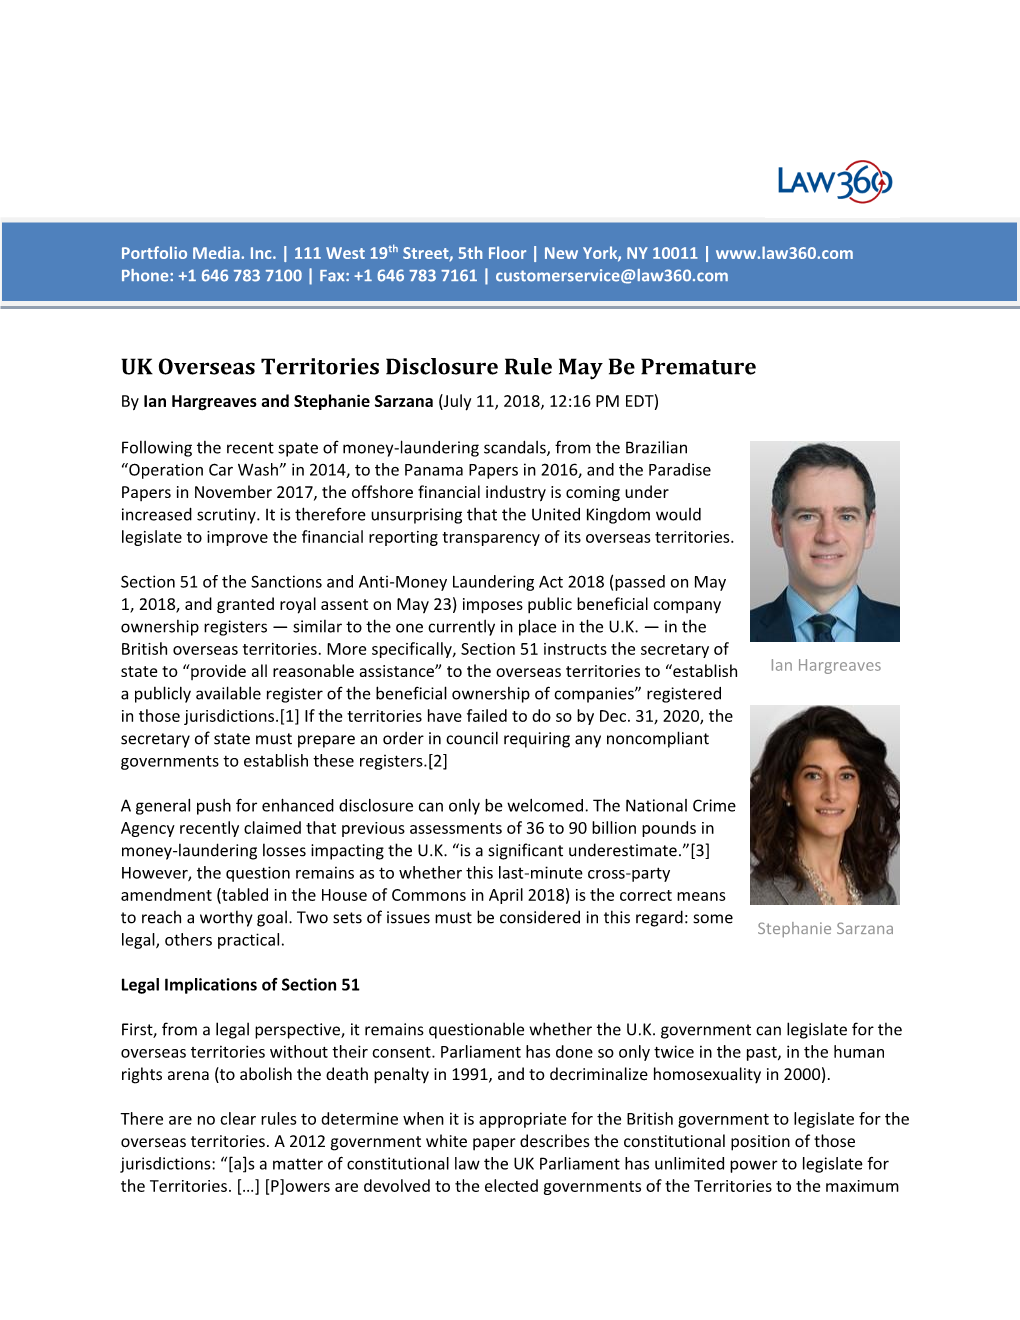 UK Overseas Territories Disclosure Rule May Be Premature by Ian Hargreaves and Stephanie Sarzana (July 11, 2018, 12:16 PM EDT)